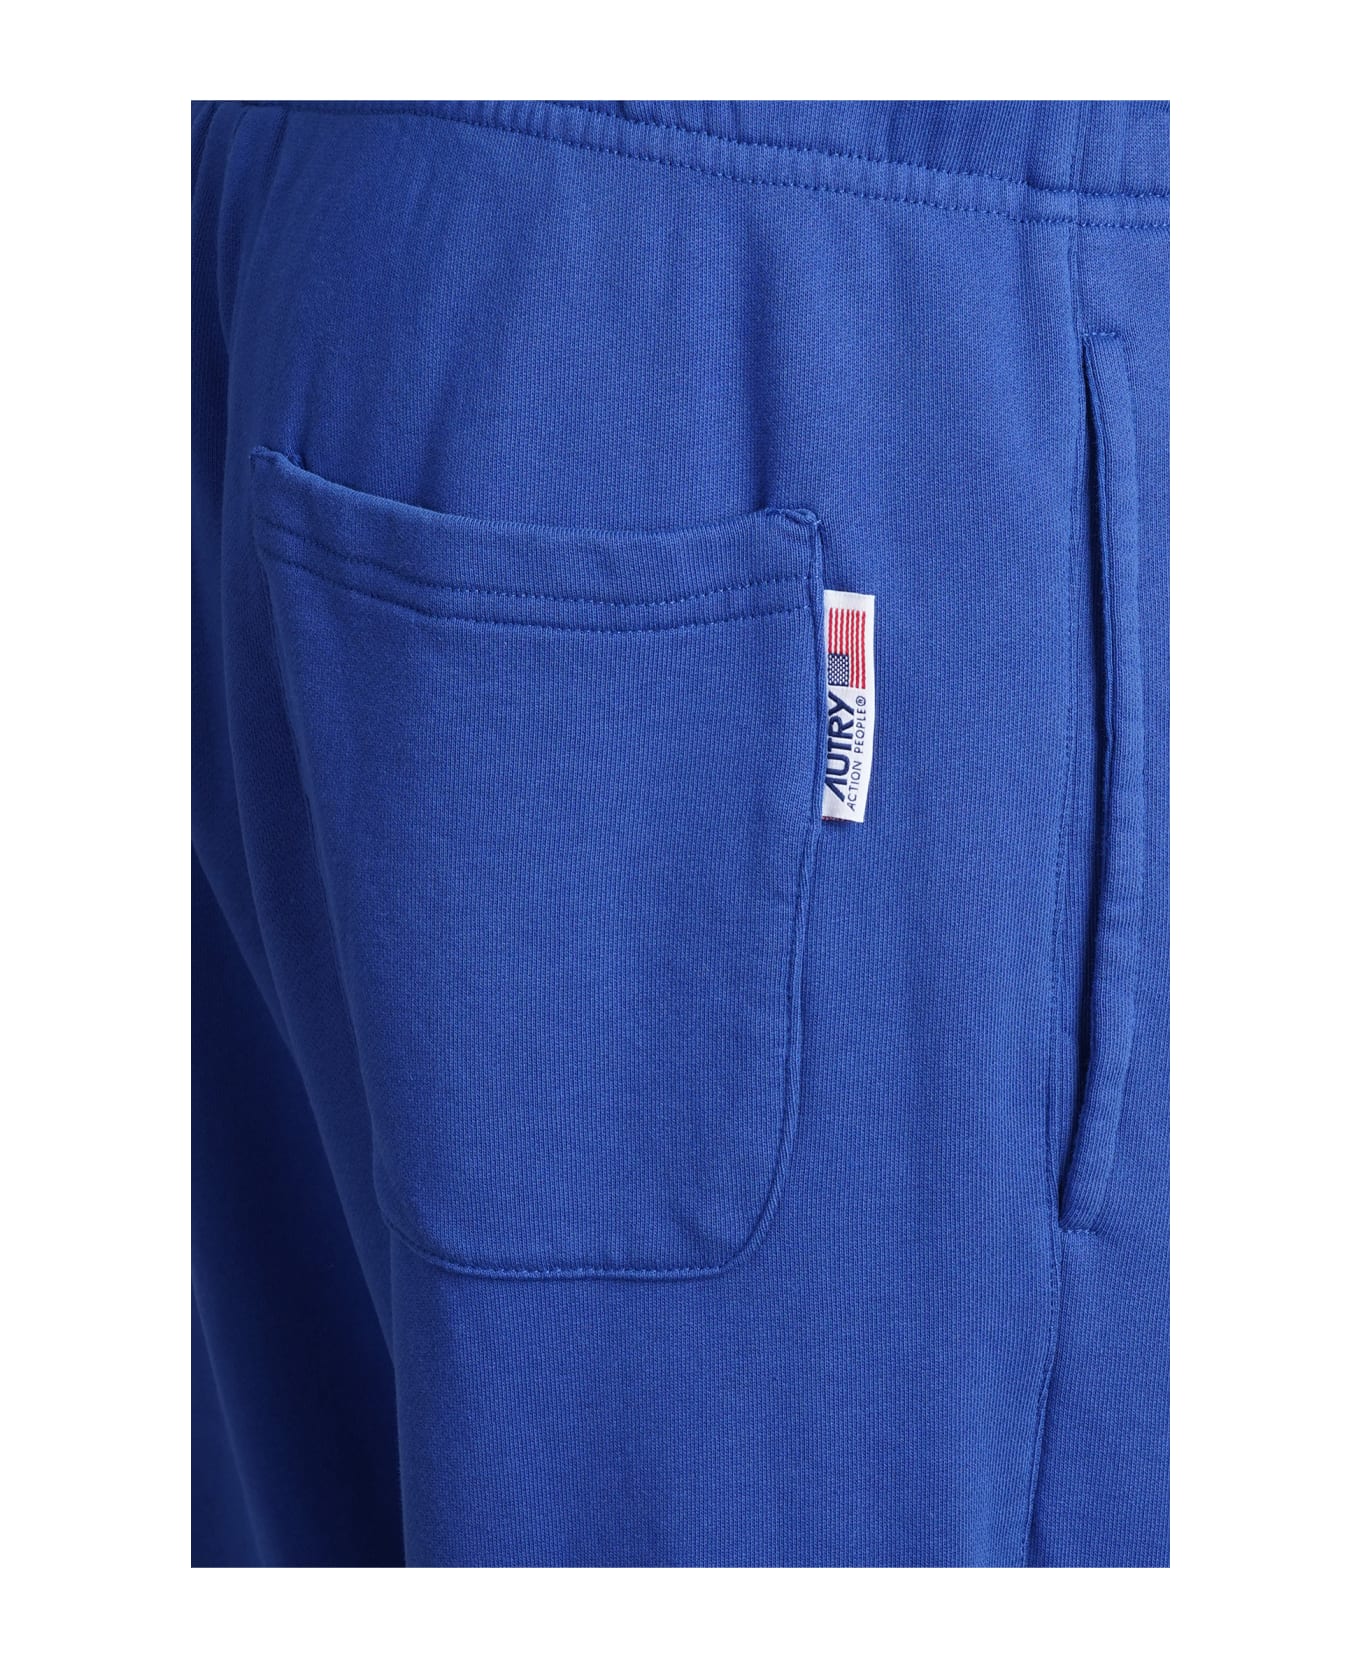 Autry Pants In Blue Cotton - Academy Blue スウェットパンツ